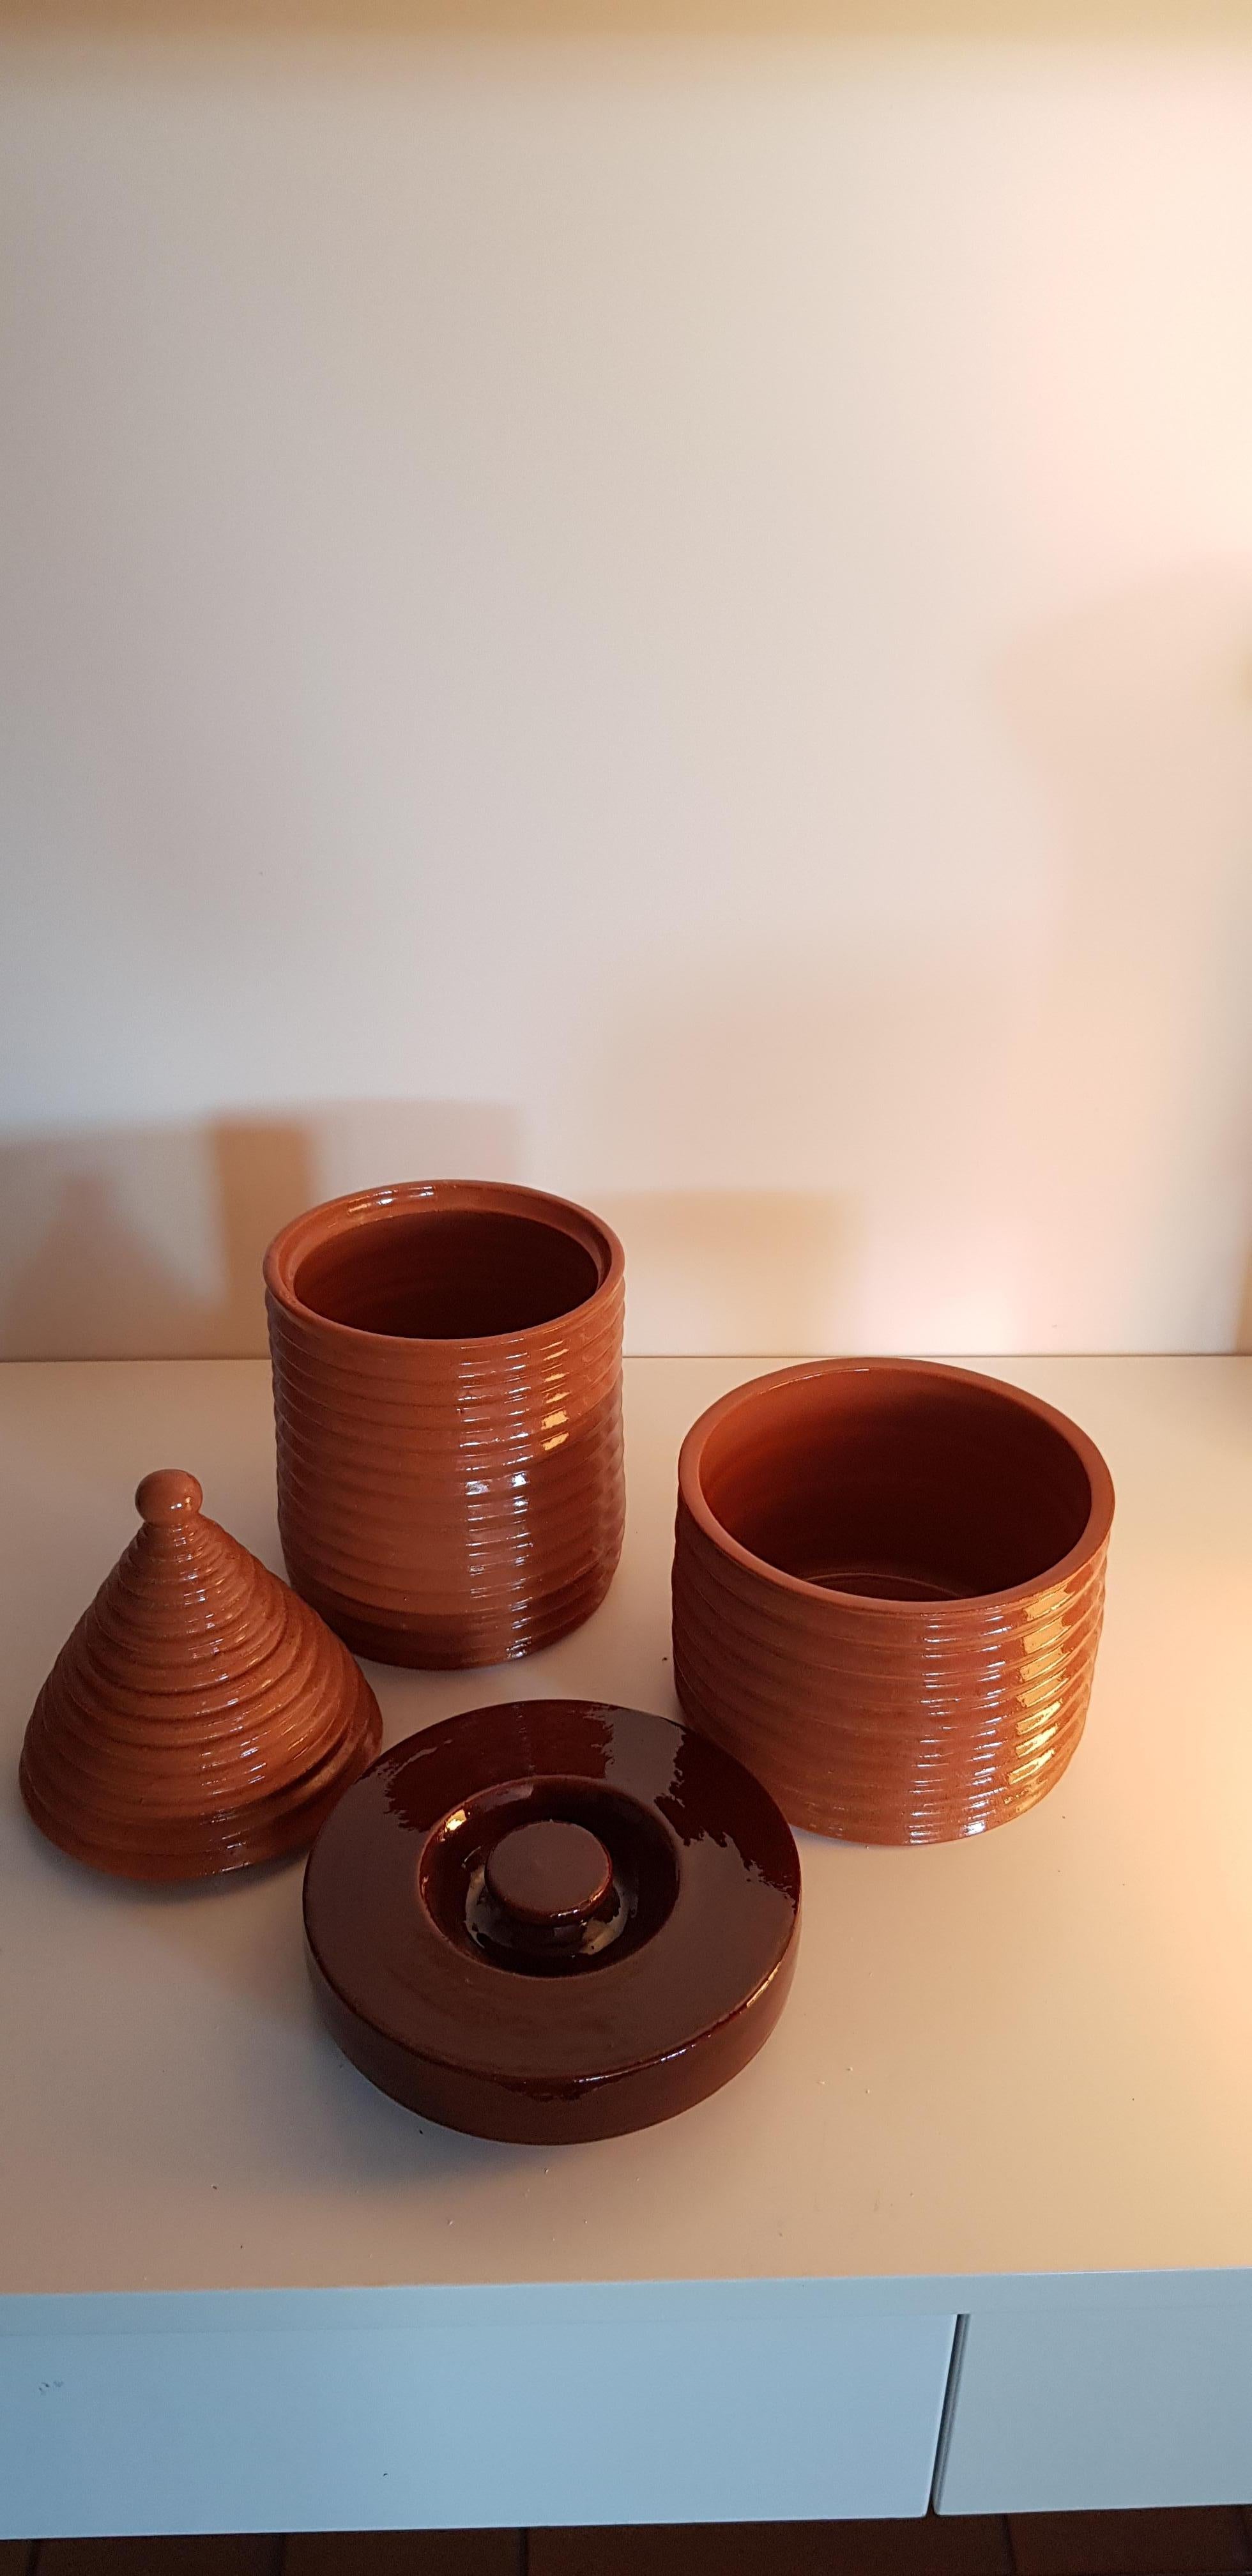 A particular set of pots that hides its function and becomes a decorative object.
It is a typical artifact of the Italian folk tradition where balanced and healthy Puglian recipes are slow-cooked, near the barbeque: these pots suits contemporary